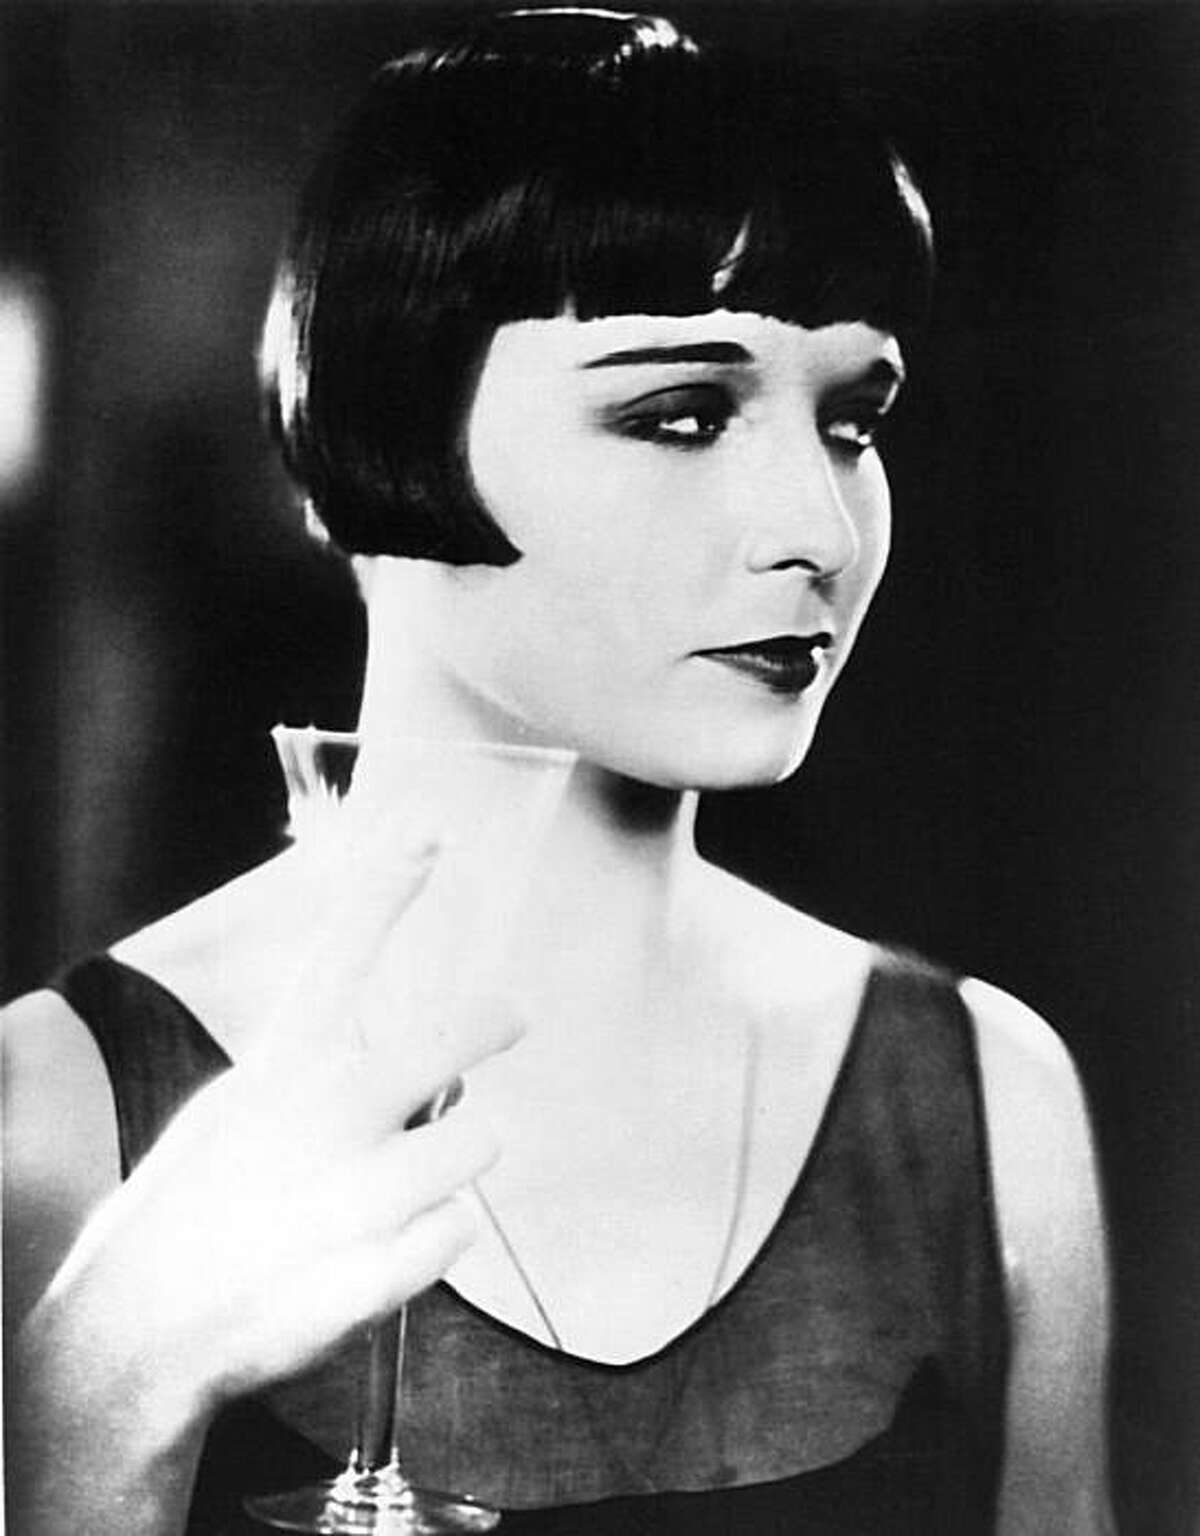 Louise Brooks as Thymian in G.W. Pabst's "Diary of a Lost Girl," part of the Silent Film Festival's 15th anniversary edition, which includes 16 programs with movies from six countries accompanied by live musicians. July 15-18 at the Castro Theatre, 429 Castro St., San Francisco. (415) 777-4908, www.silentfilm.org.